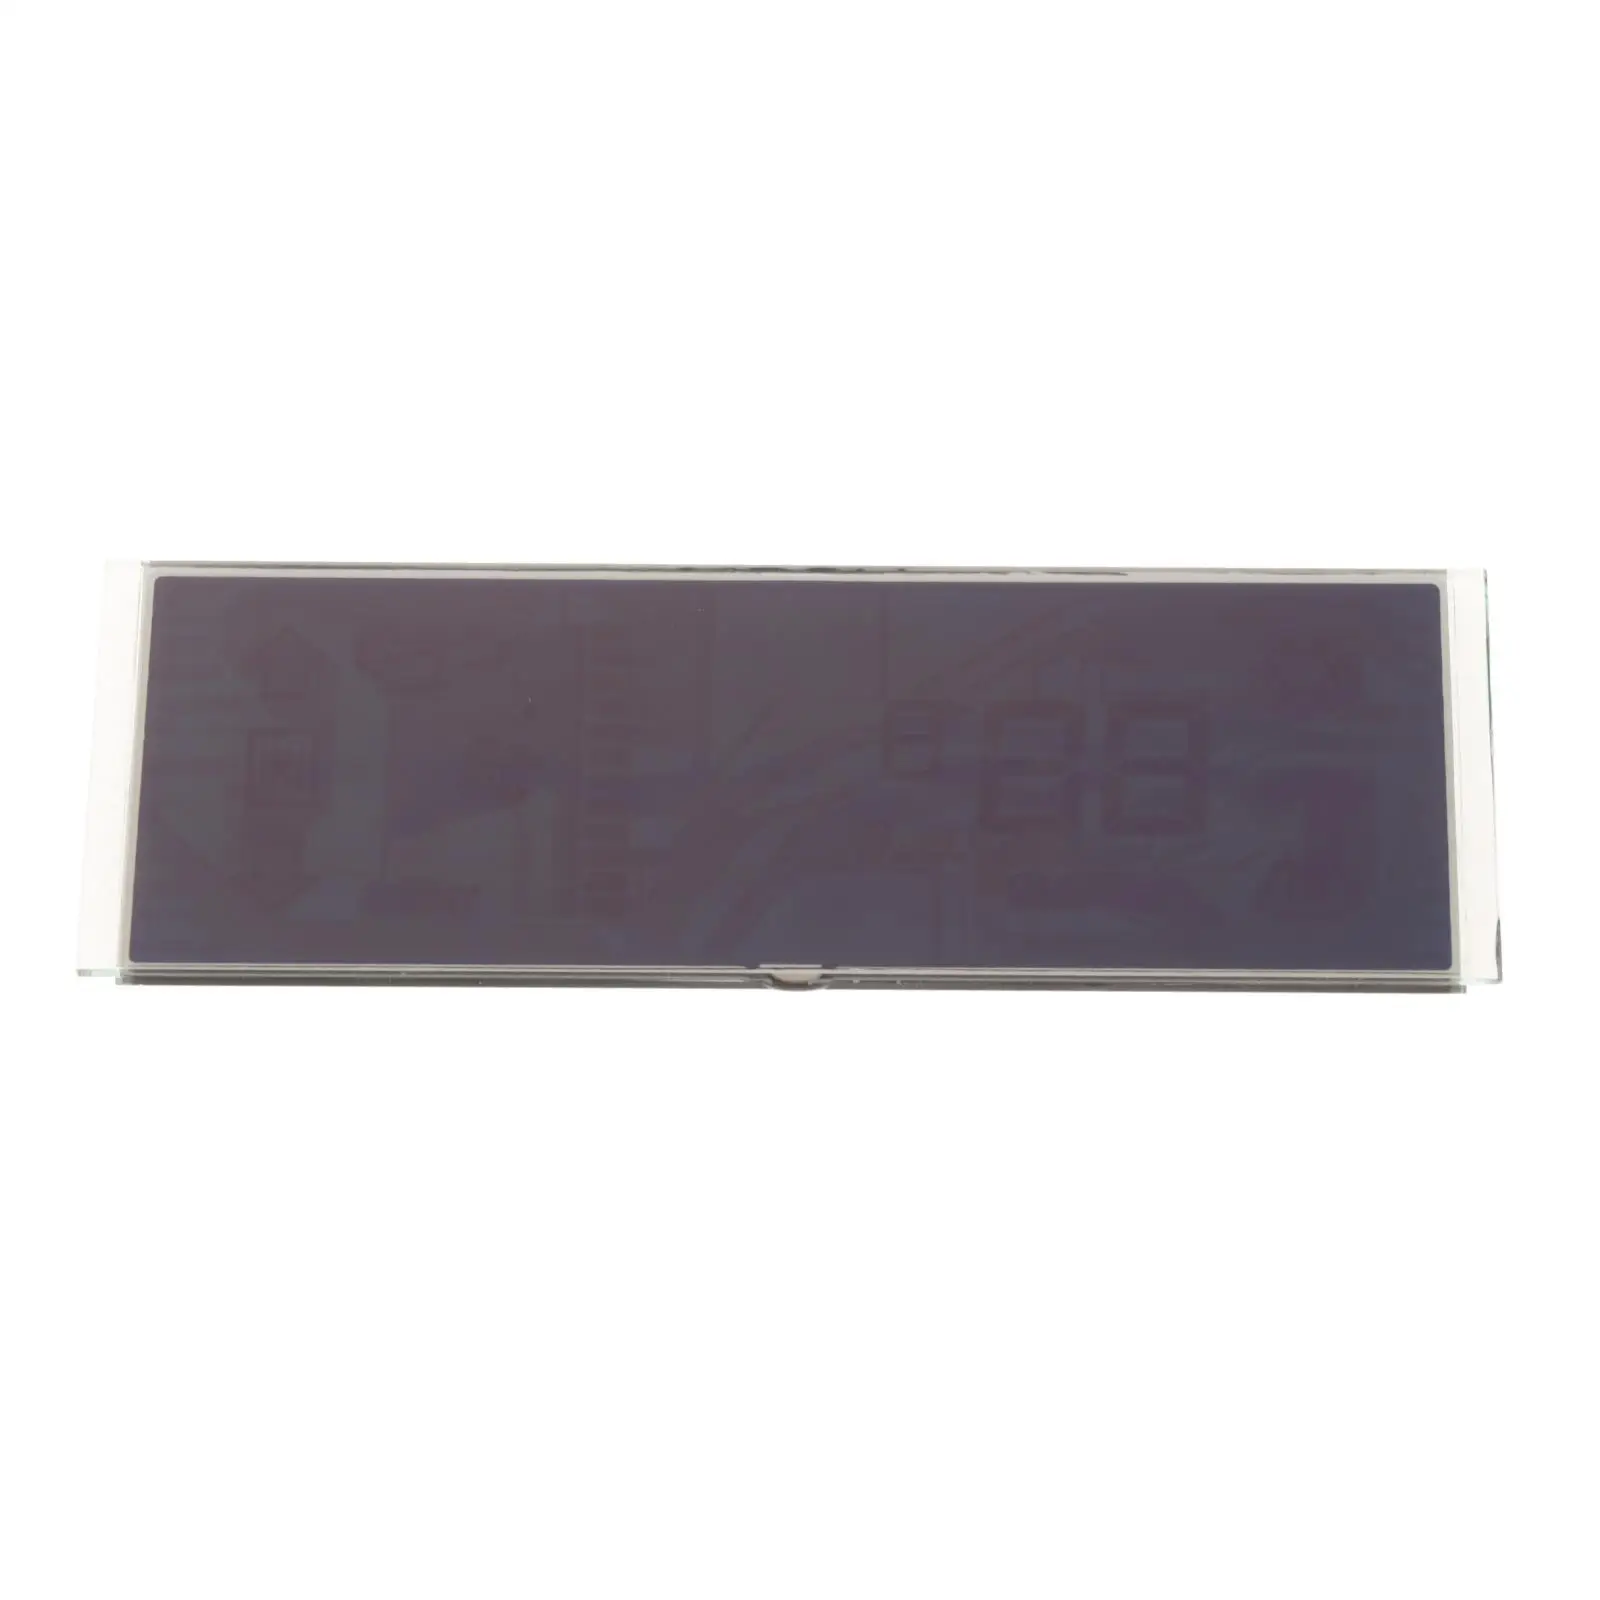 Display Fit for 911 996 Ruf R 2001-2005 Ruf Rgt 2000-2004